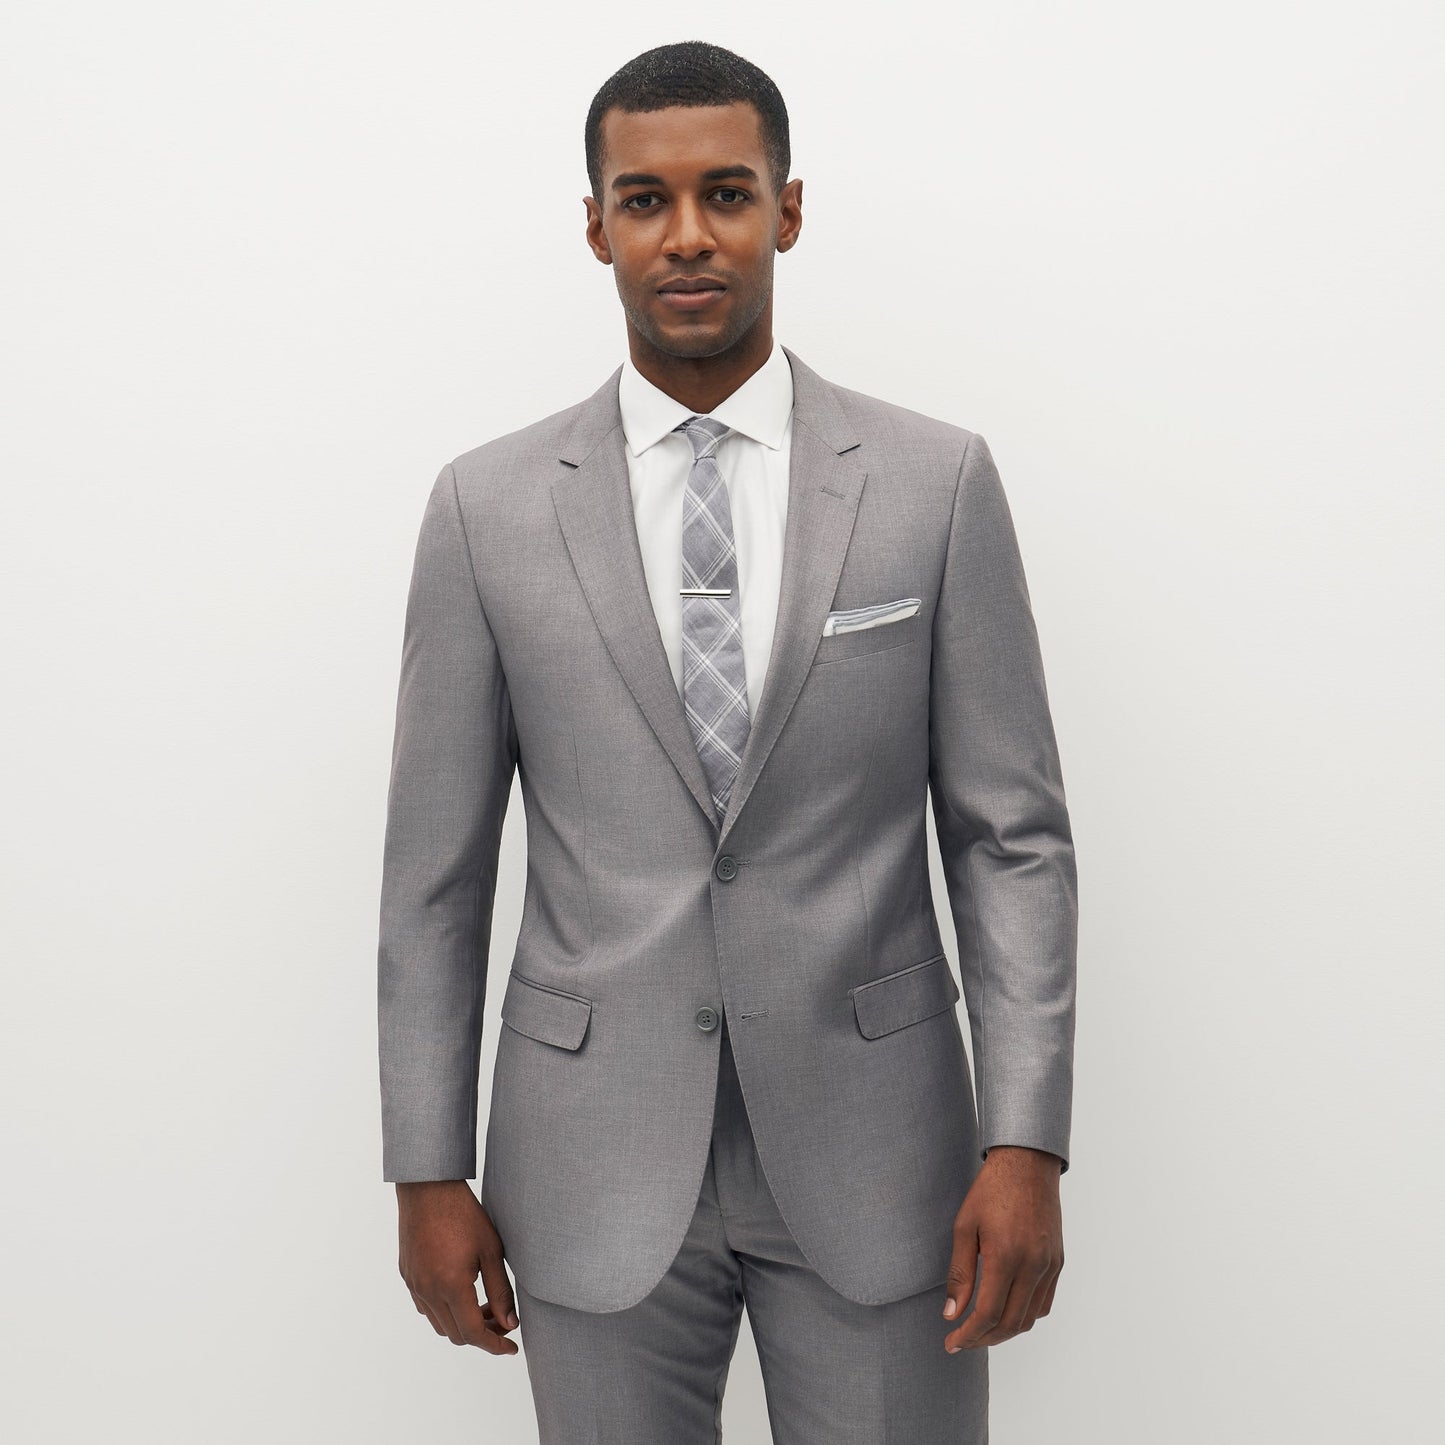 Textured Gray Suit Jacket (Comfort Stretch) by SuitShop